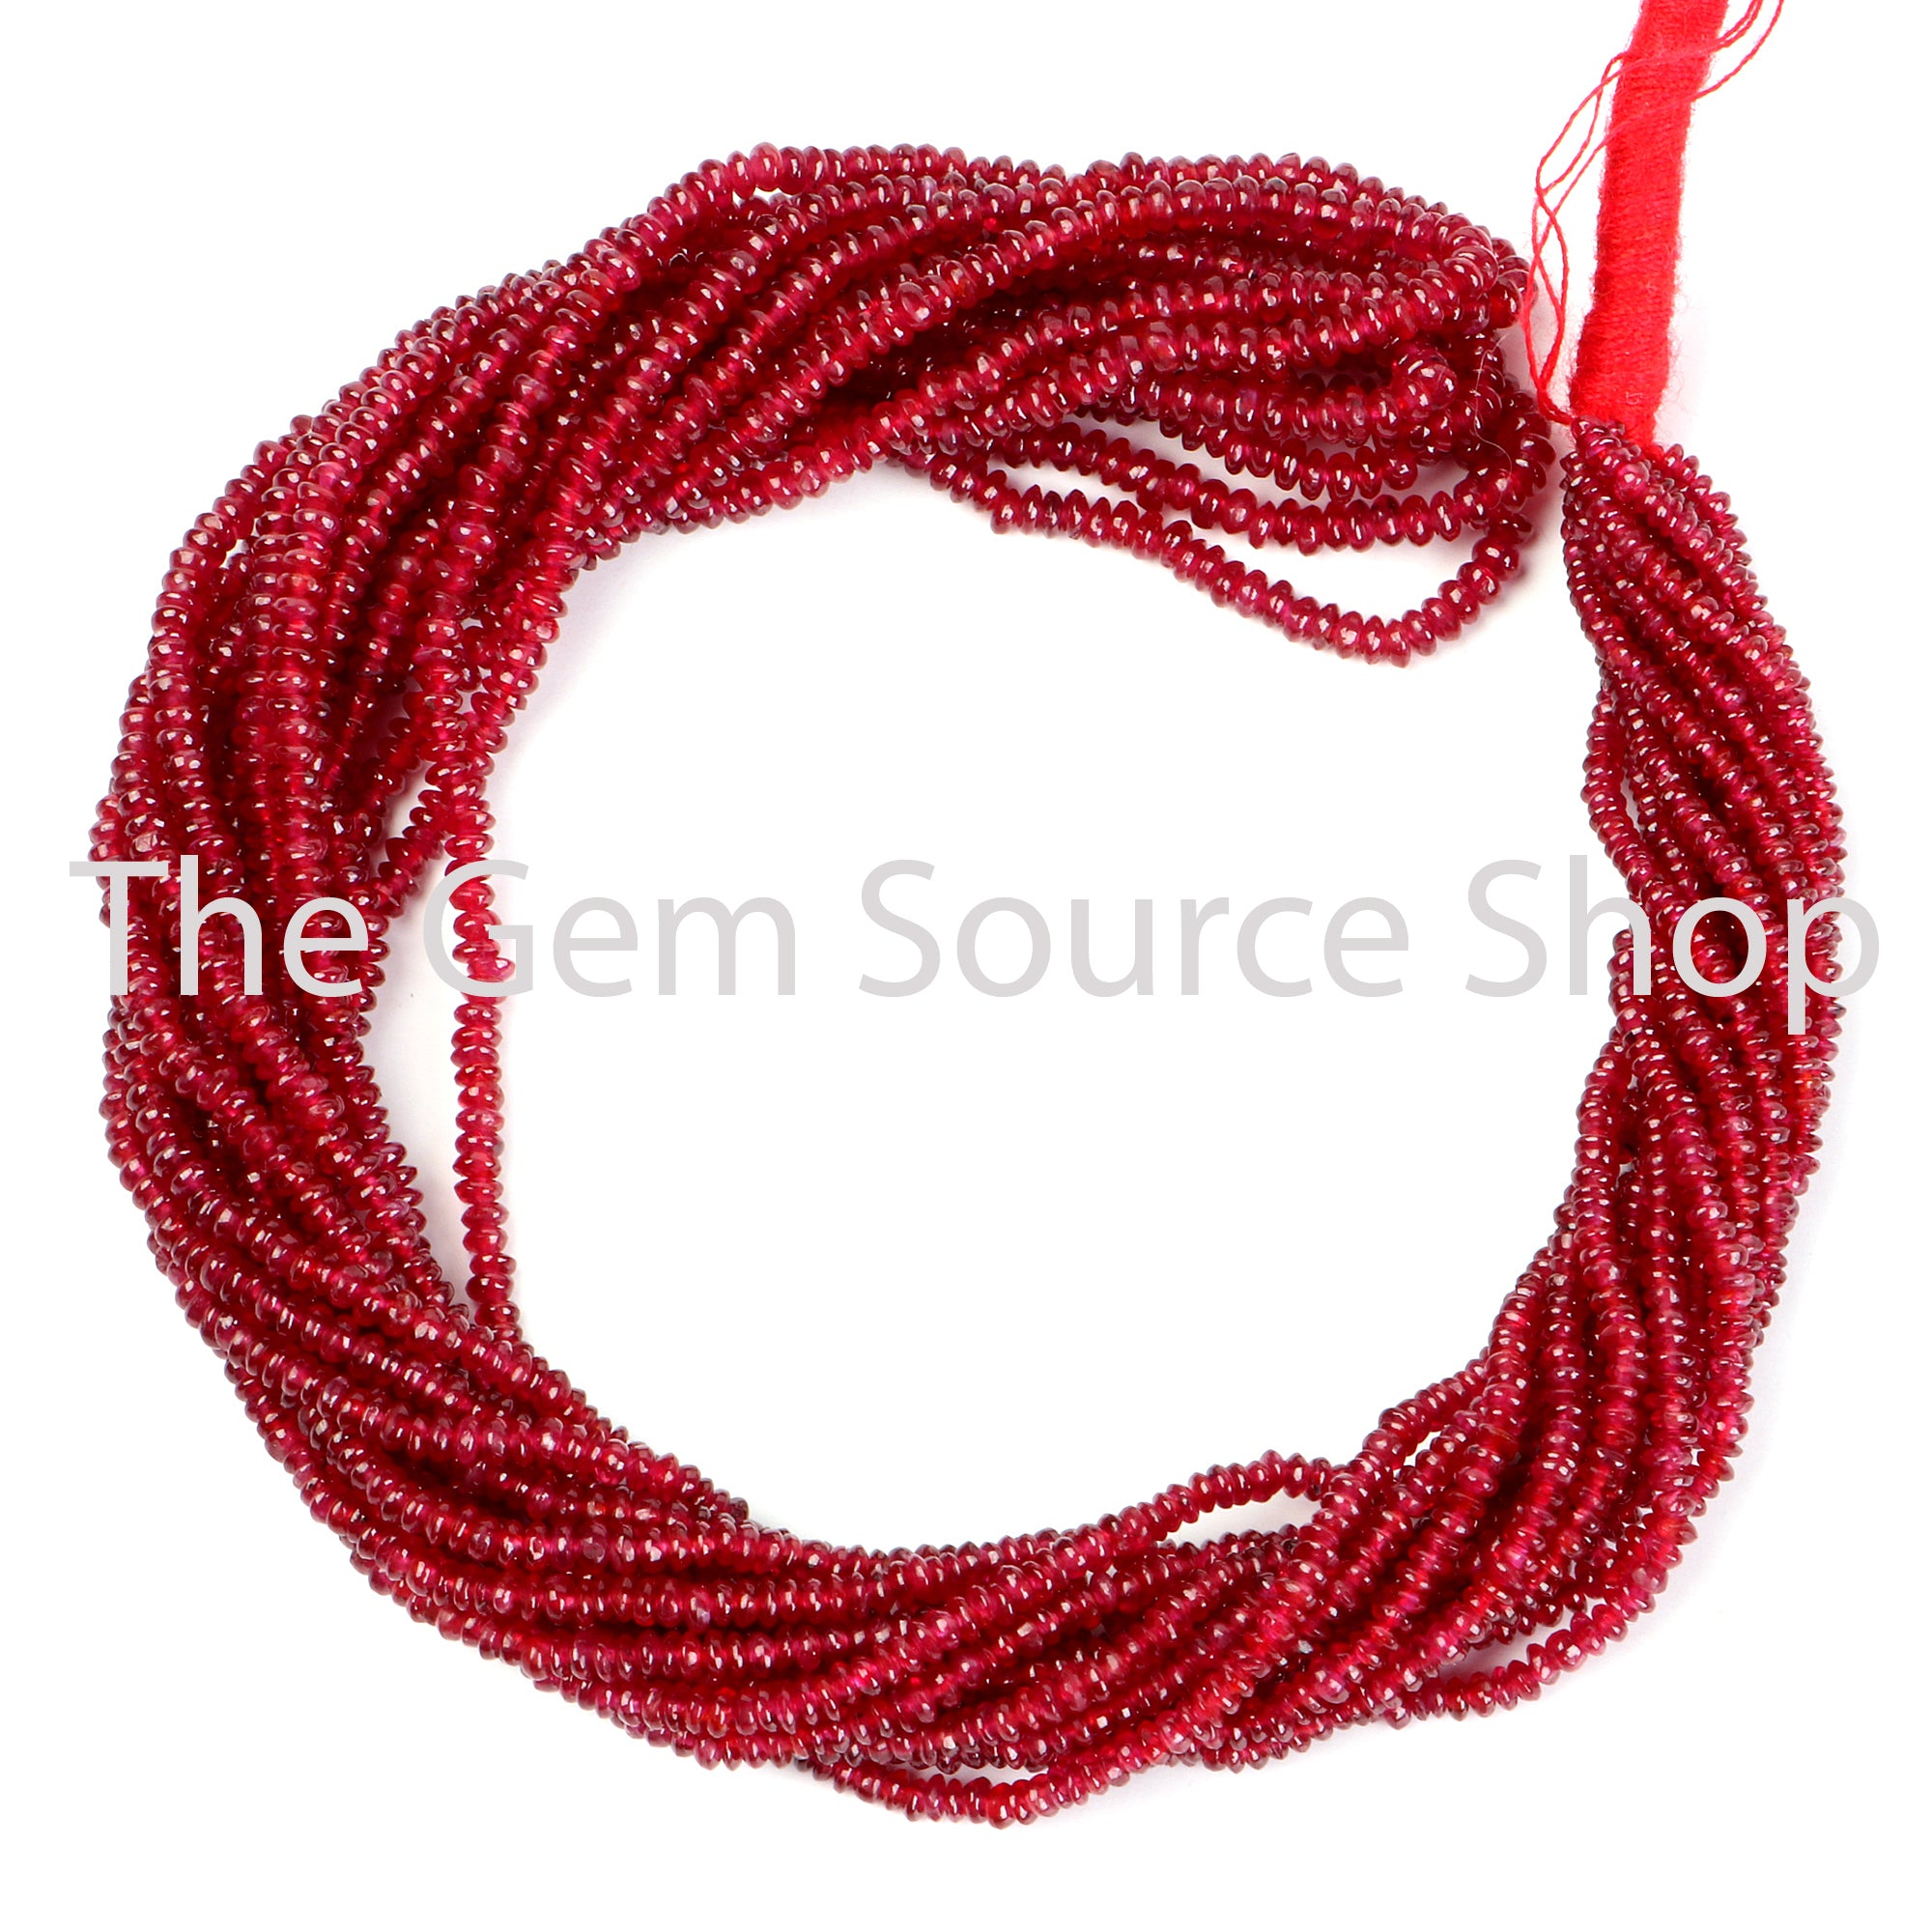 Ruby Smooth Rondelle Shape Gemstone Beads TGS-2458